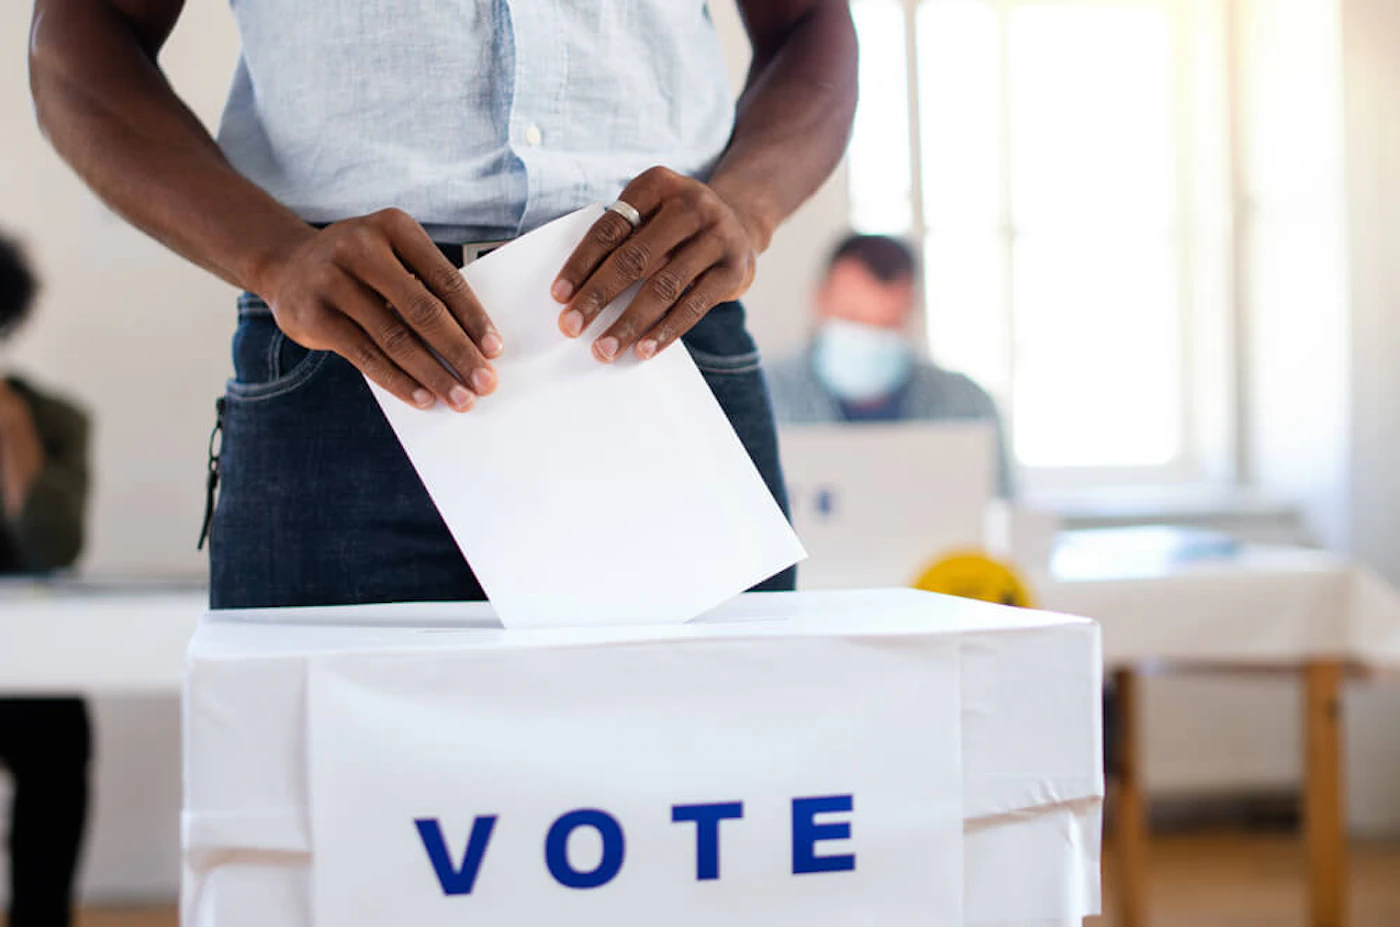 A Wake County panel of judges found the state was wrongly denying people on probation and parole from voting, a disproportionate number of whom are Black. (Image via Shutterstock.